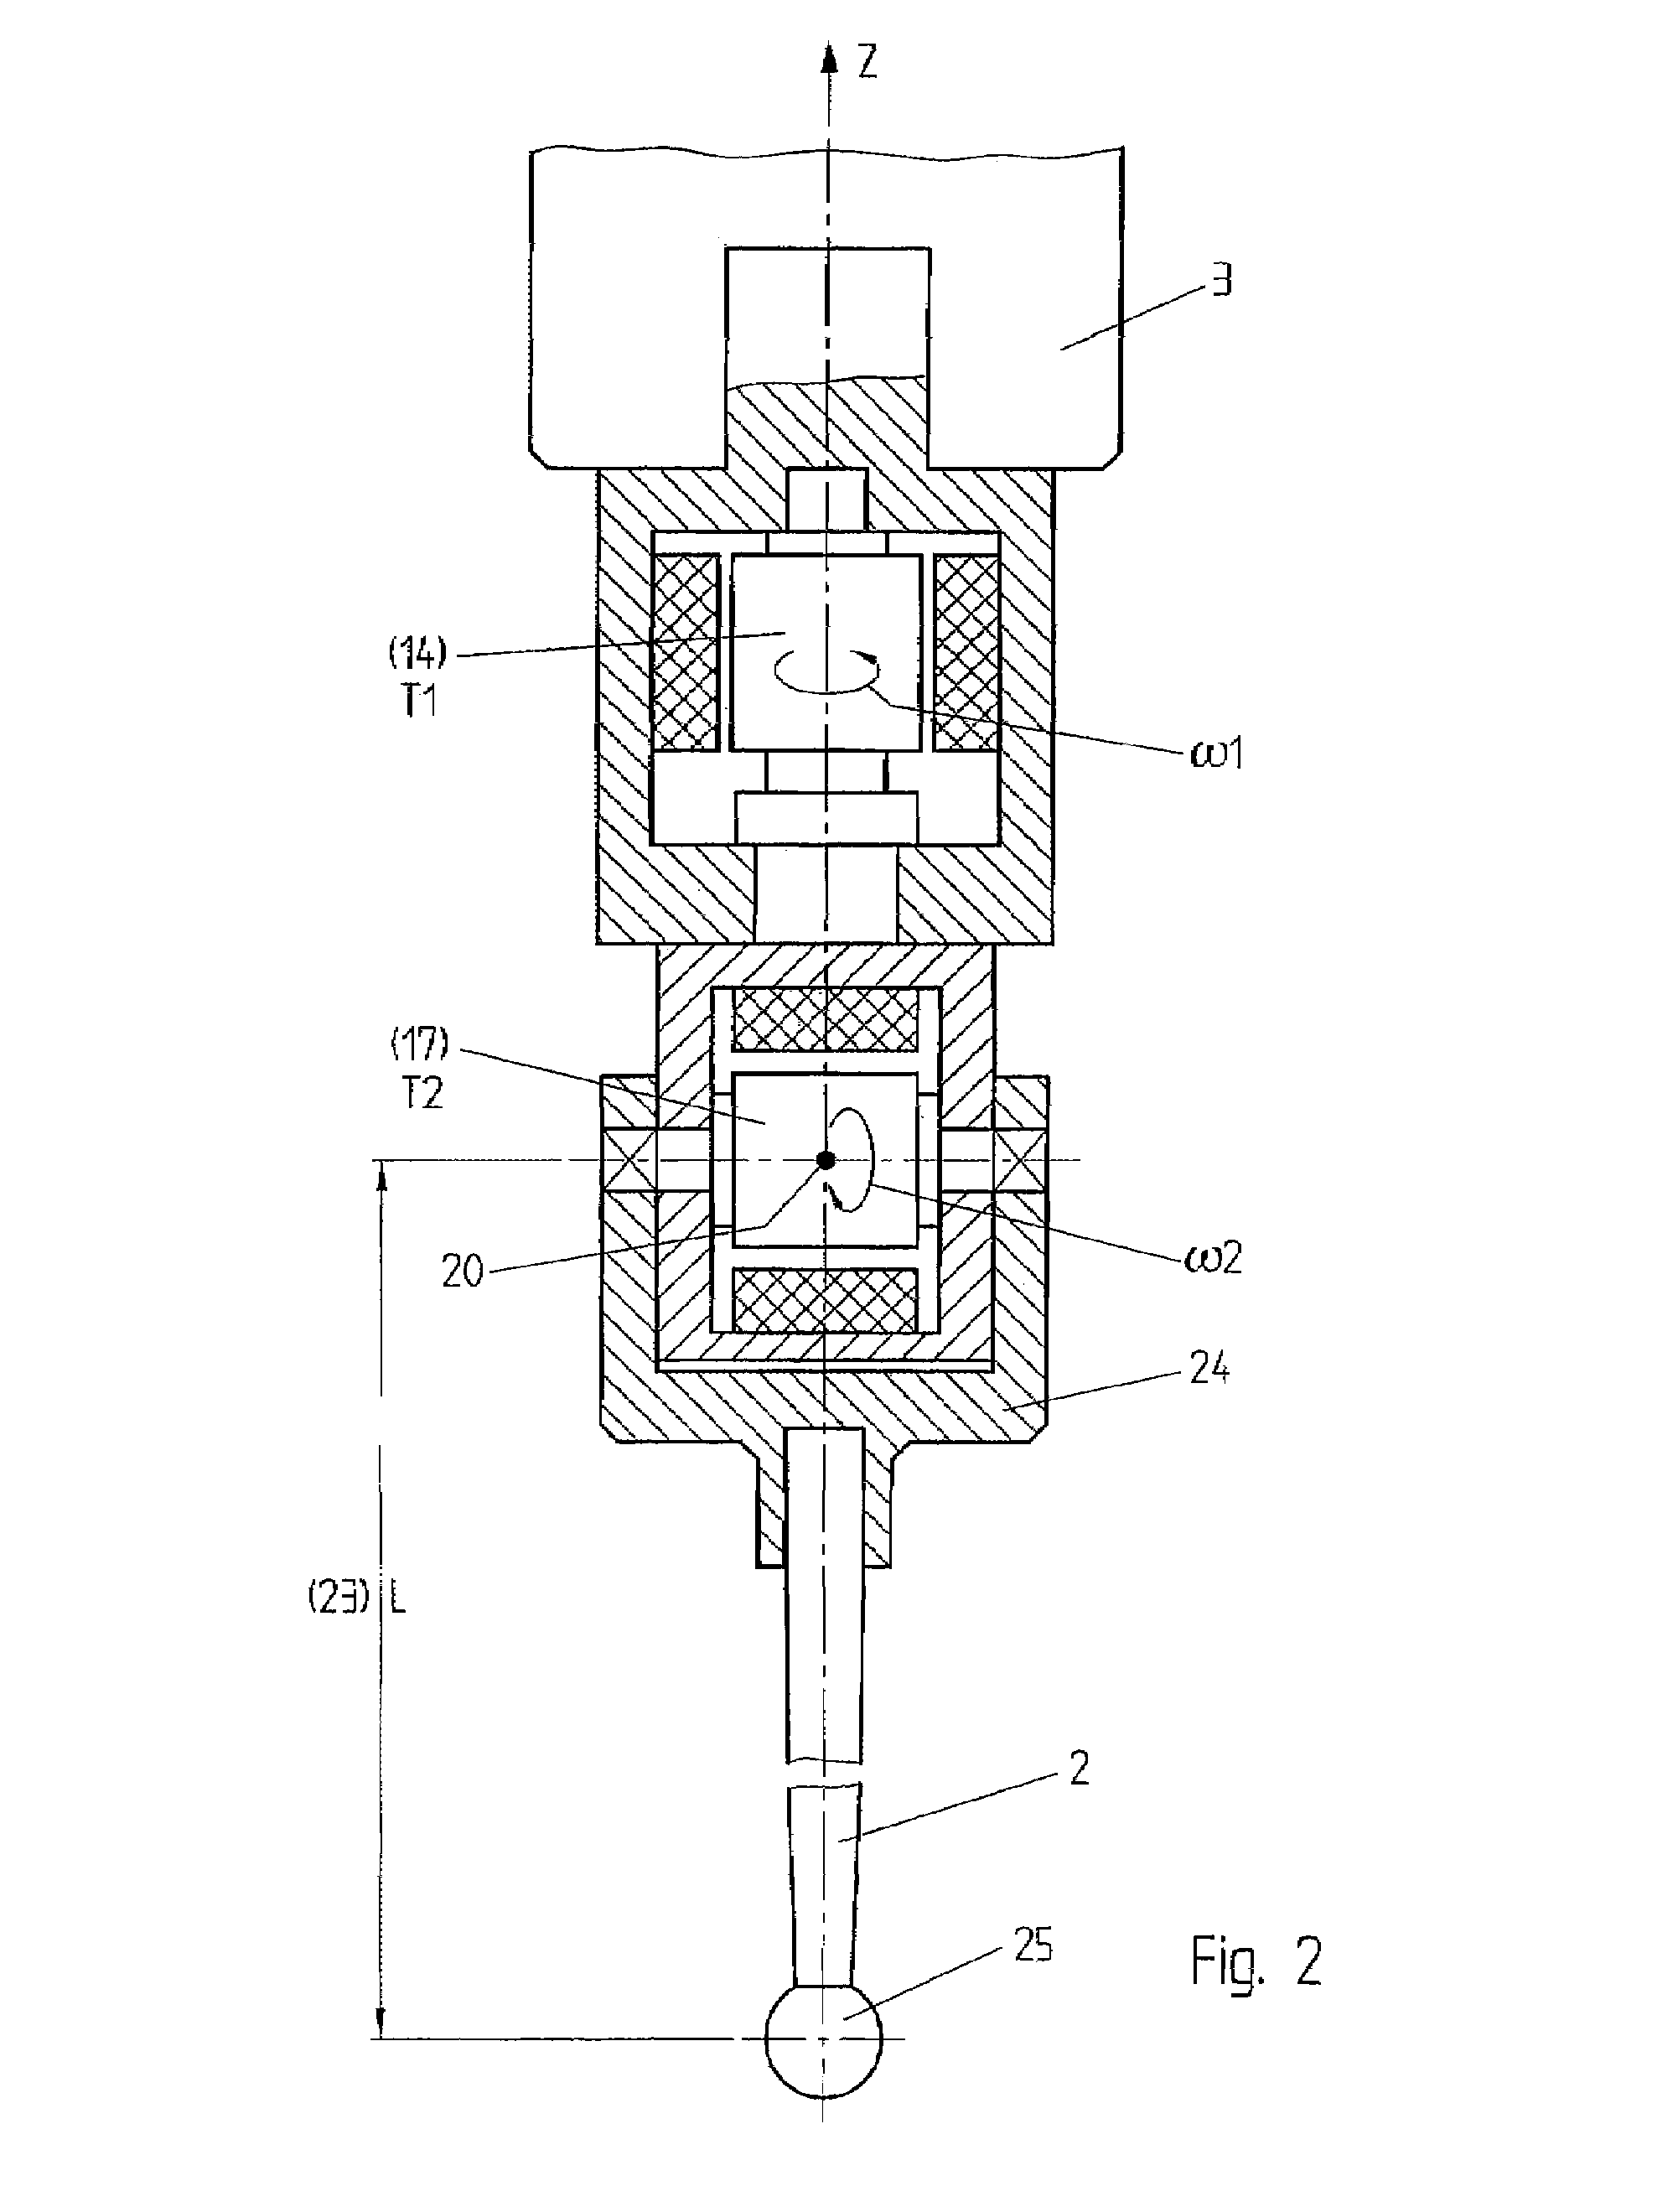 Scanning probe with constant scanning speed